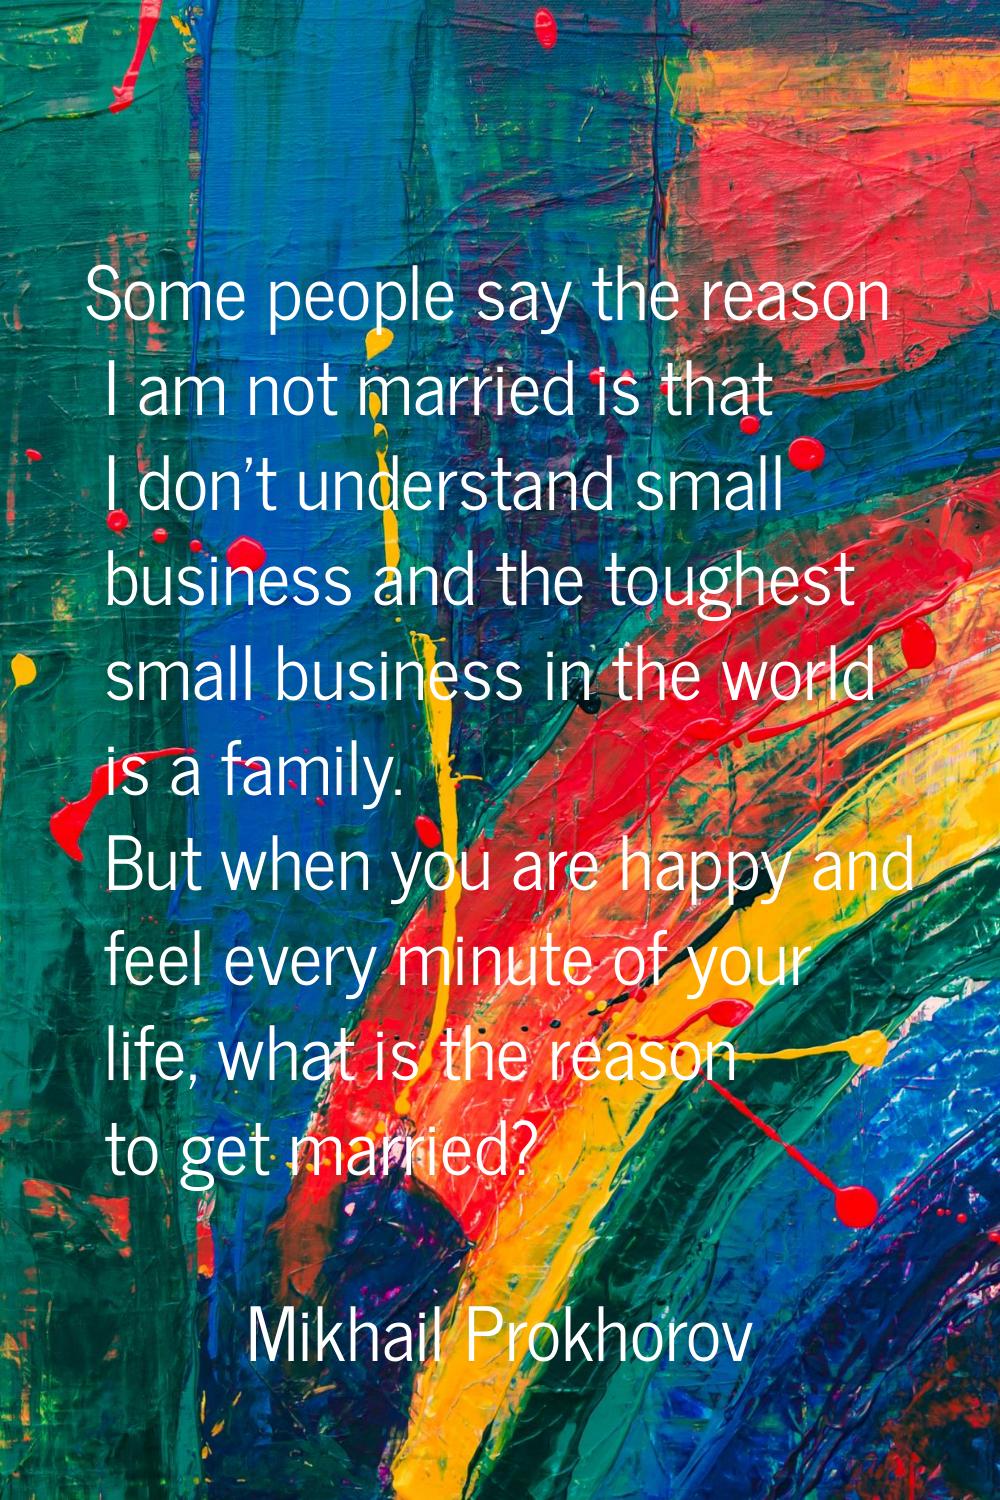 Some people say the reason I am not married is that I don't understand small business and the tough